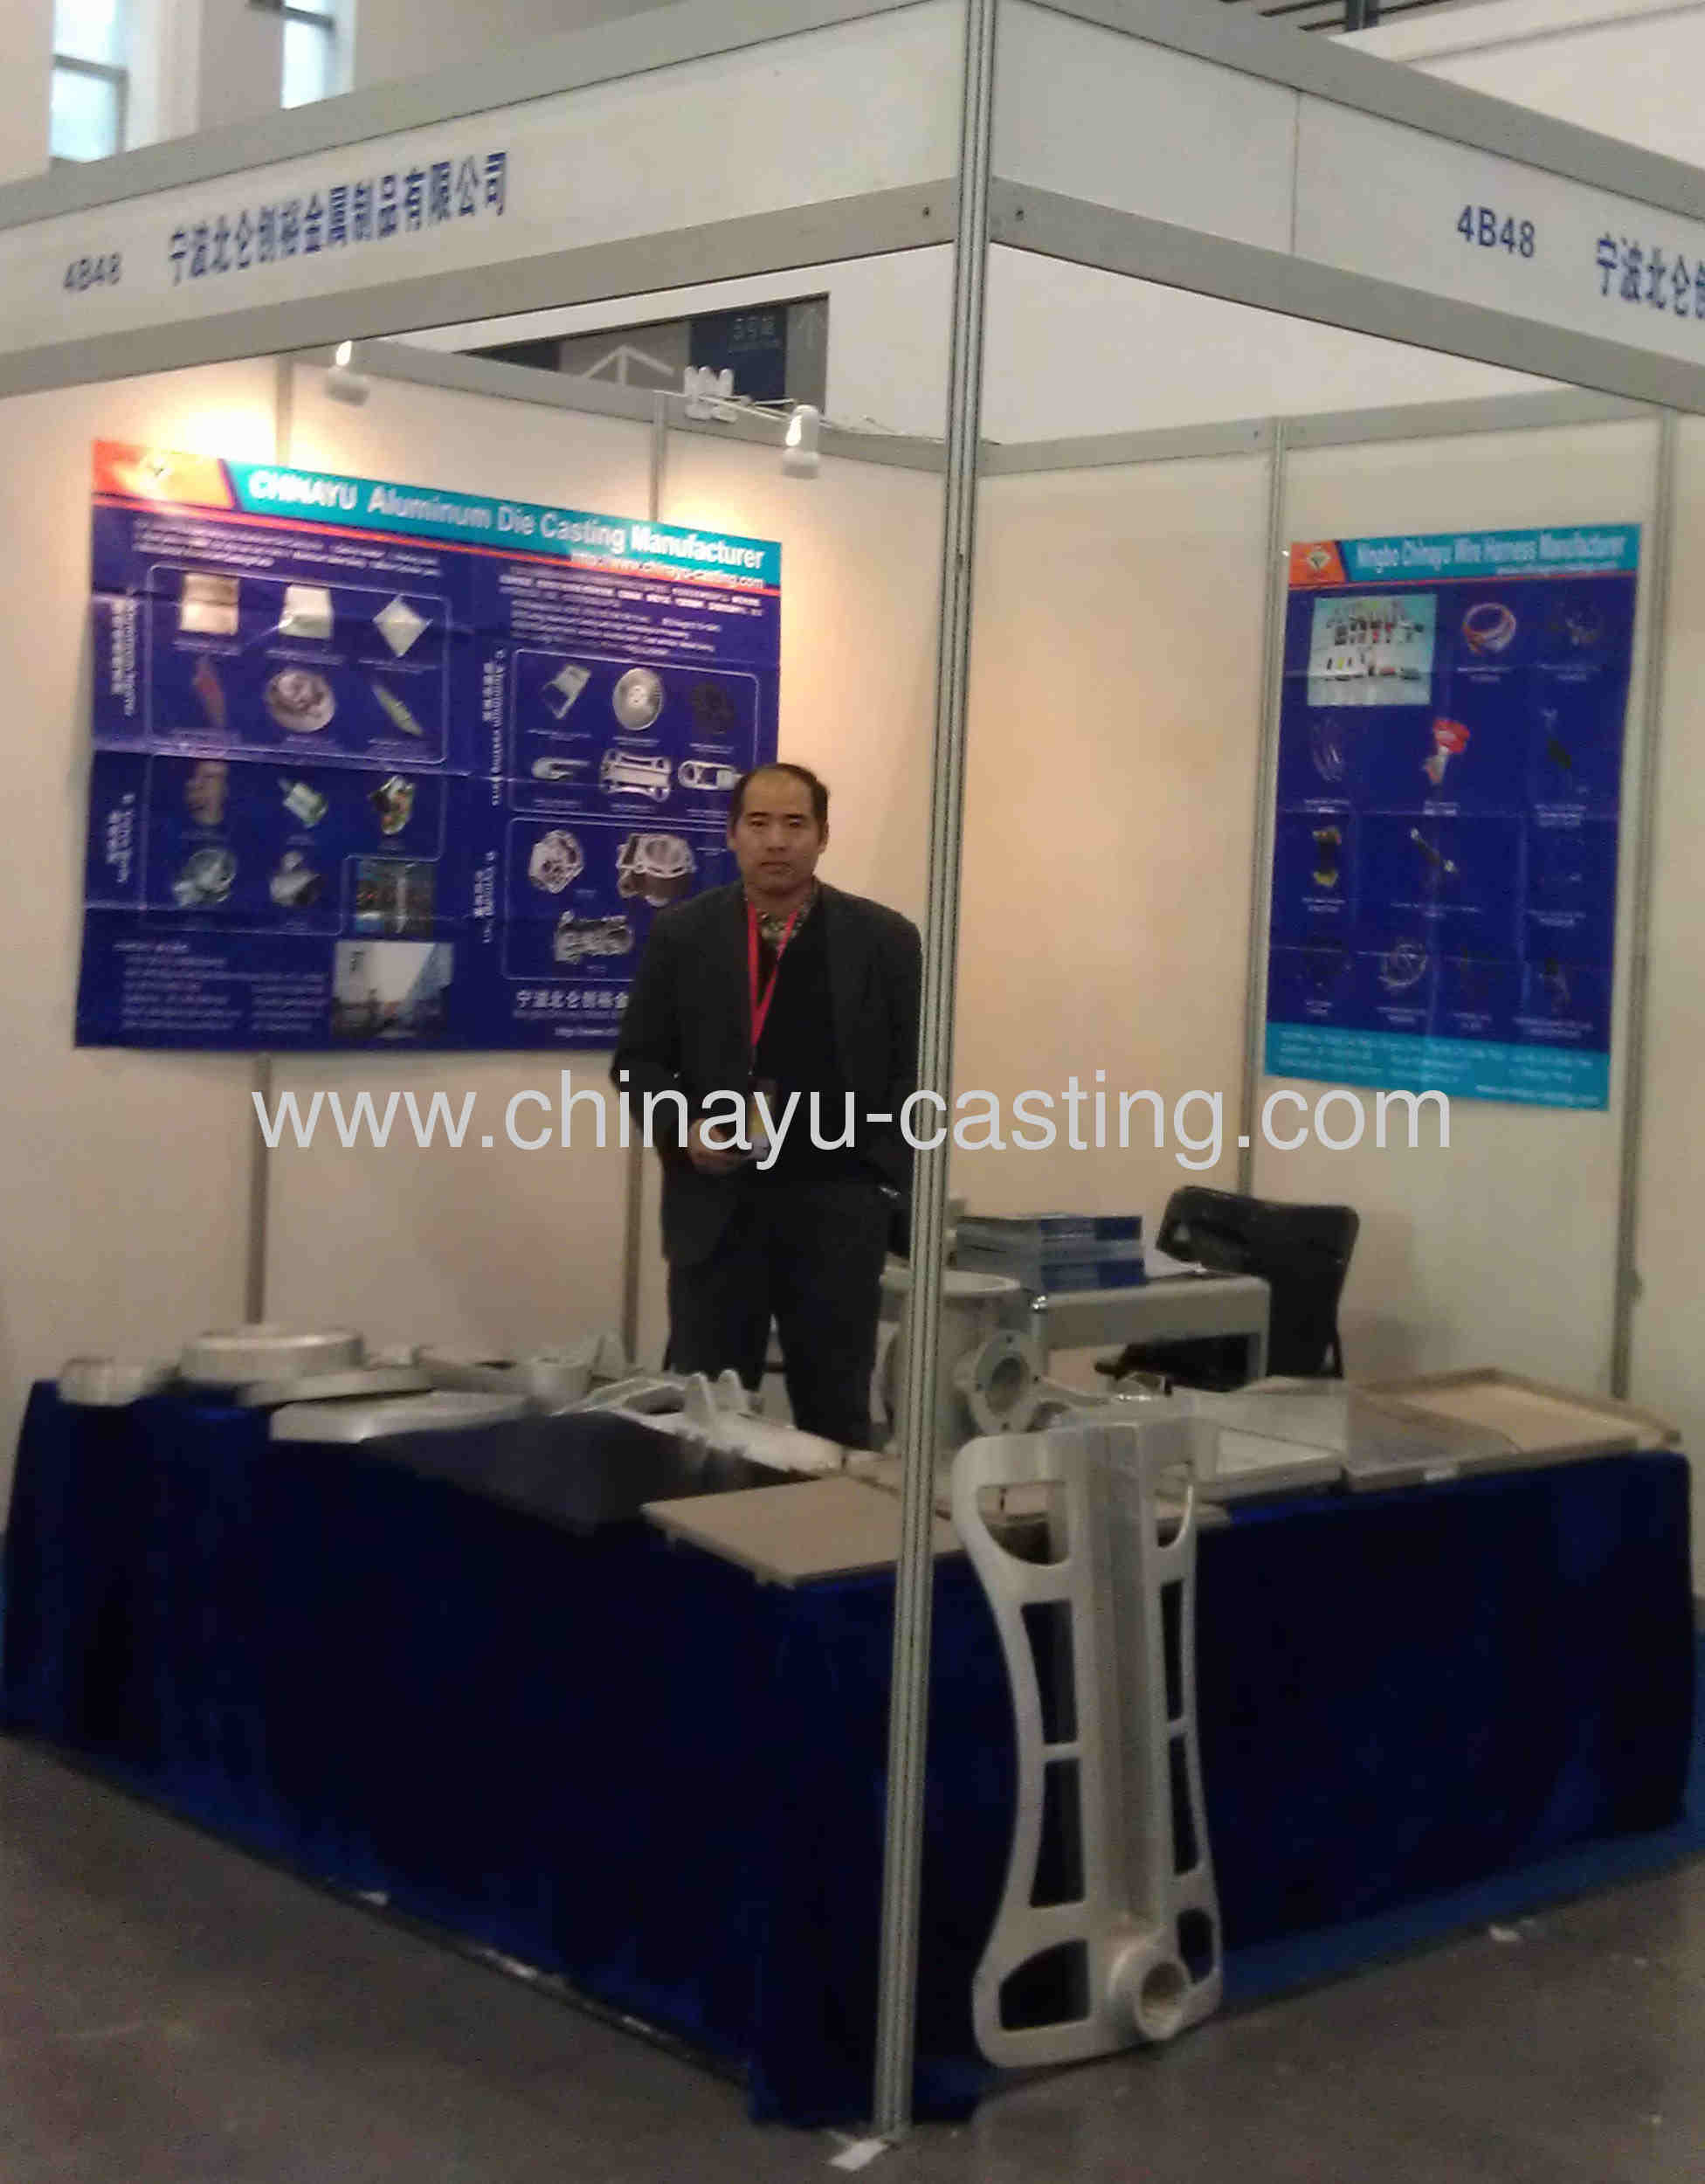 Attend 2012 Ningbo Casting, Forging,Die Casting Industrial Exhibition